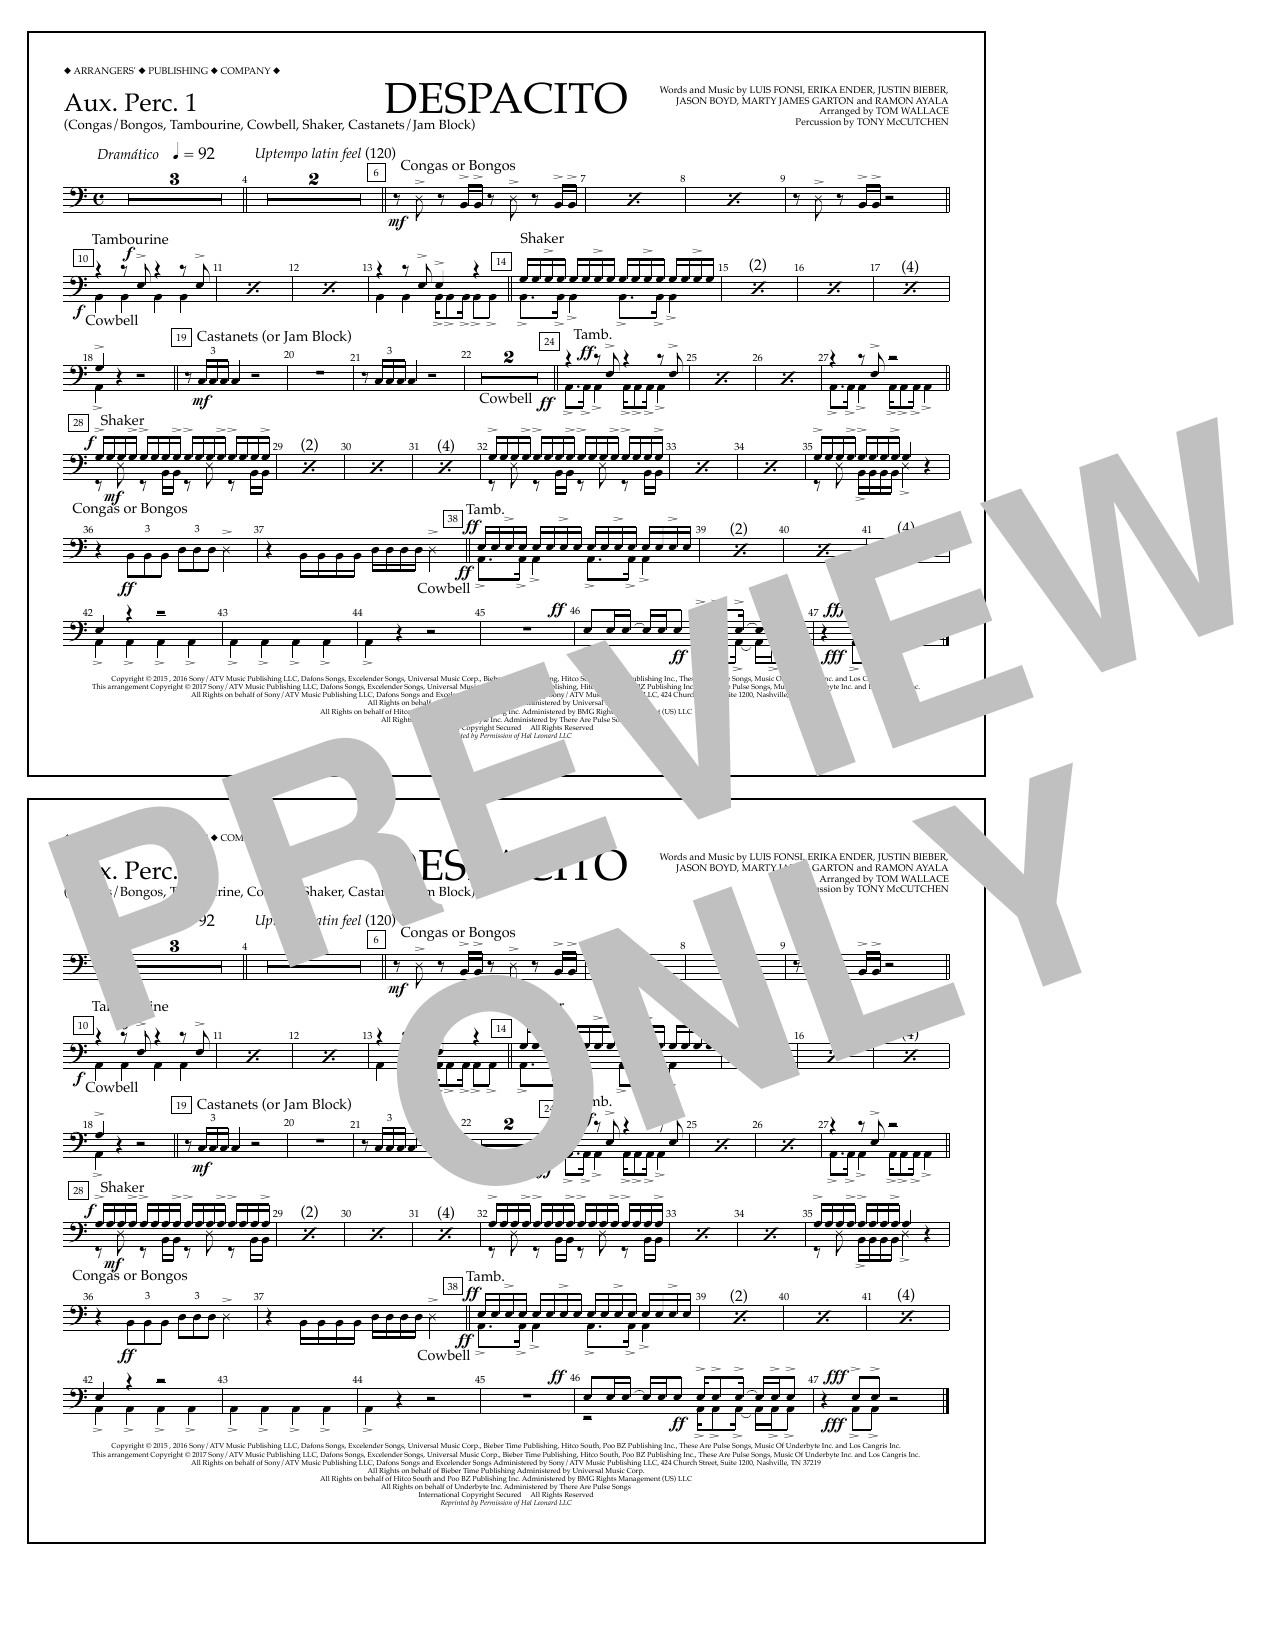 Download Tom Wallace Despacito - Aux. Perc. 1 Sheet Music